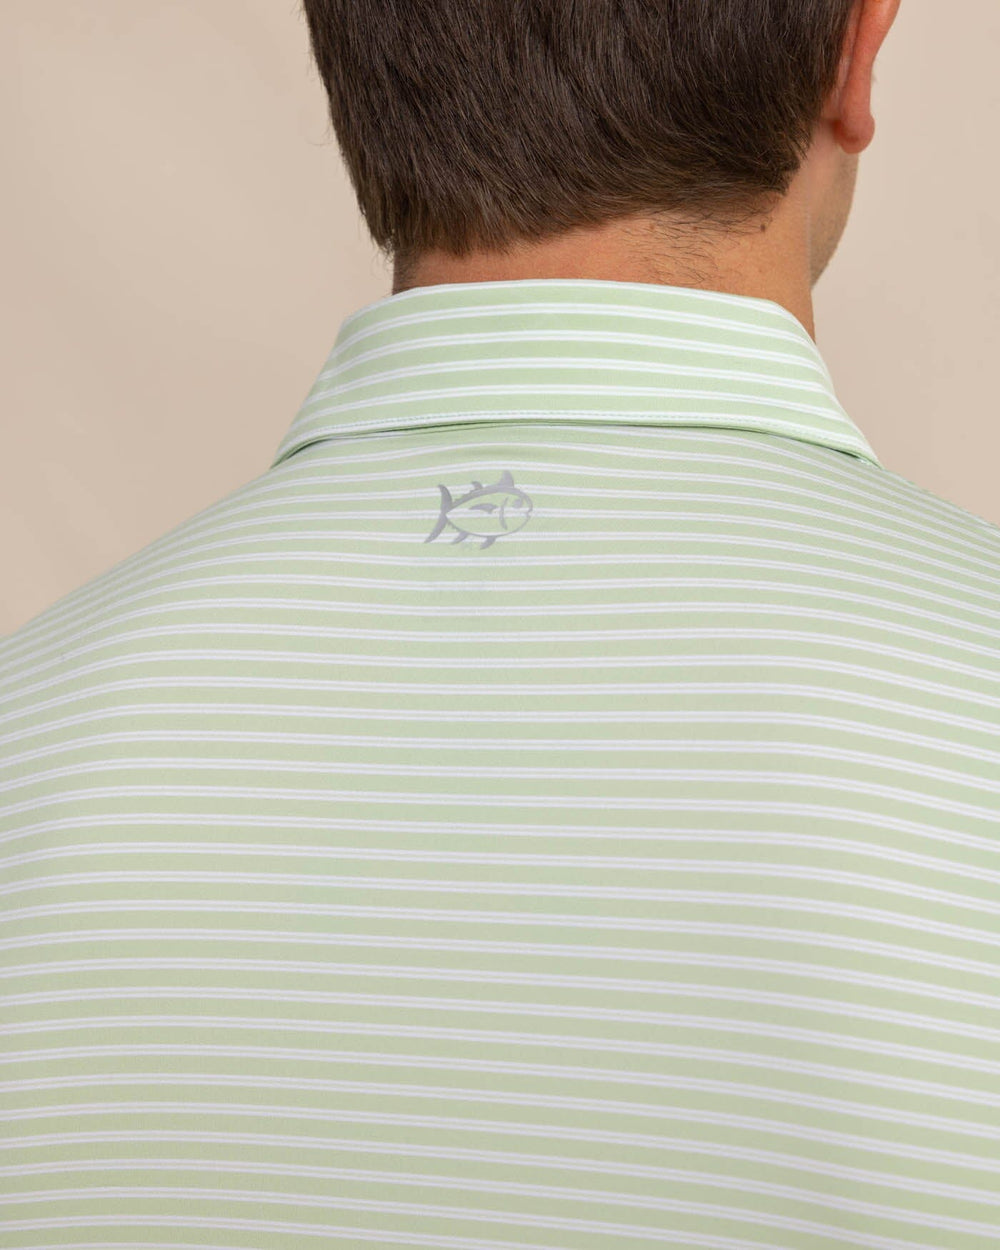 The detail view of the Southern Tide brrr eeze Beattie Stripe Performance Polo by Southern Tide - Smoke Green